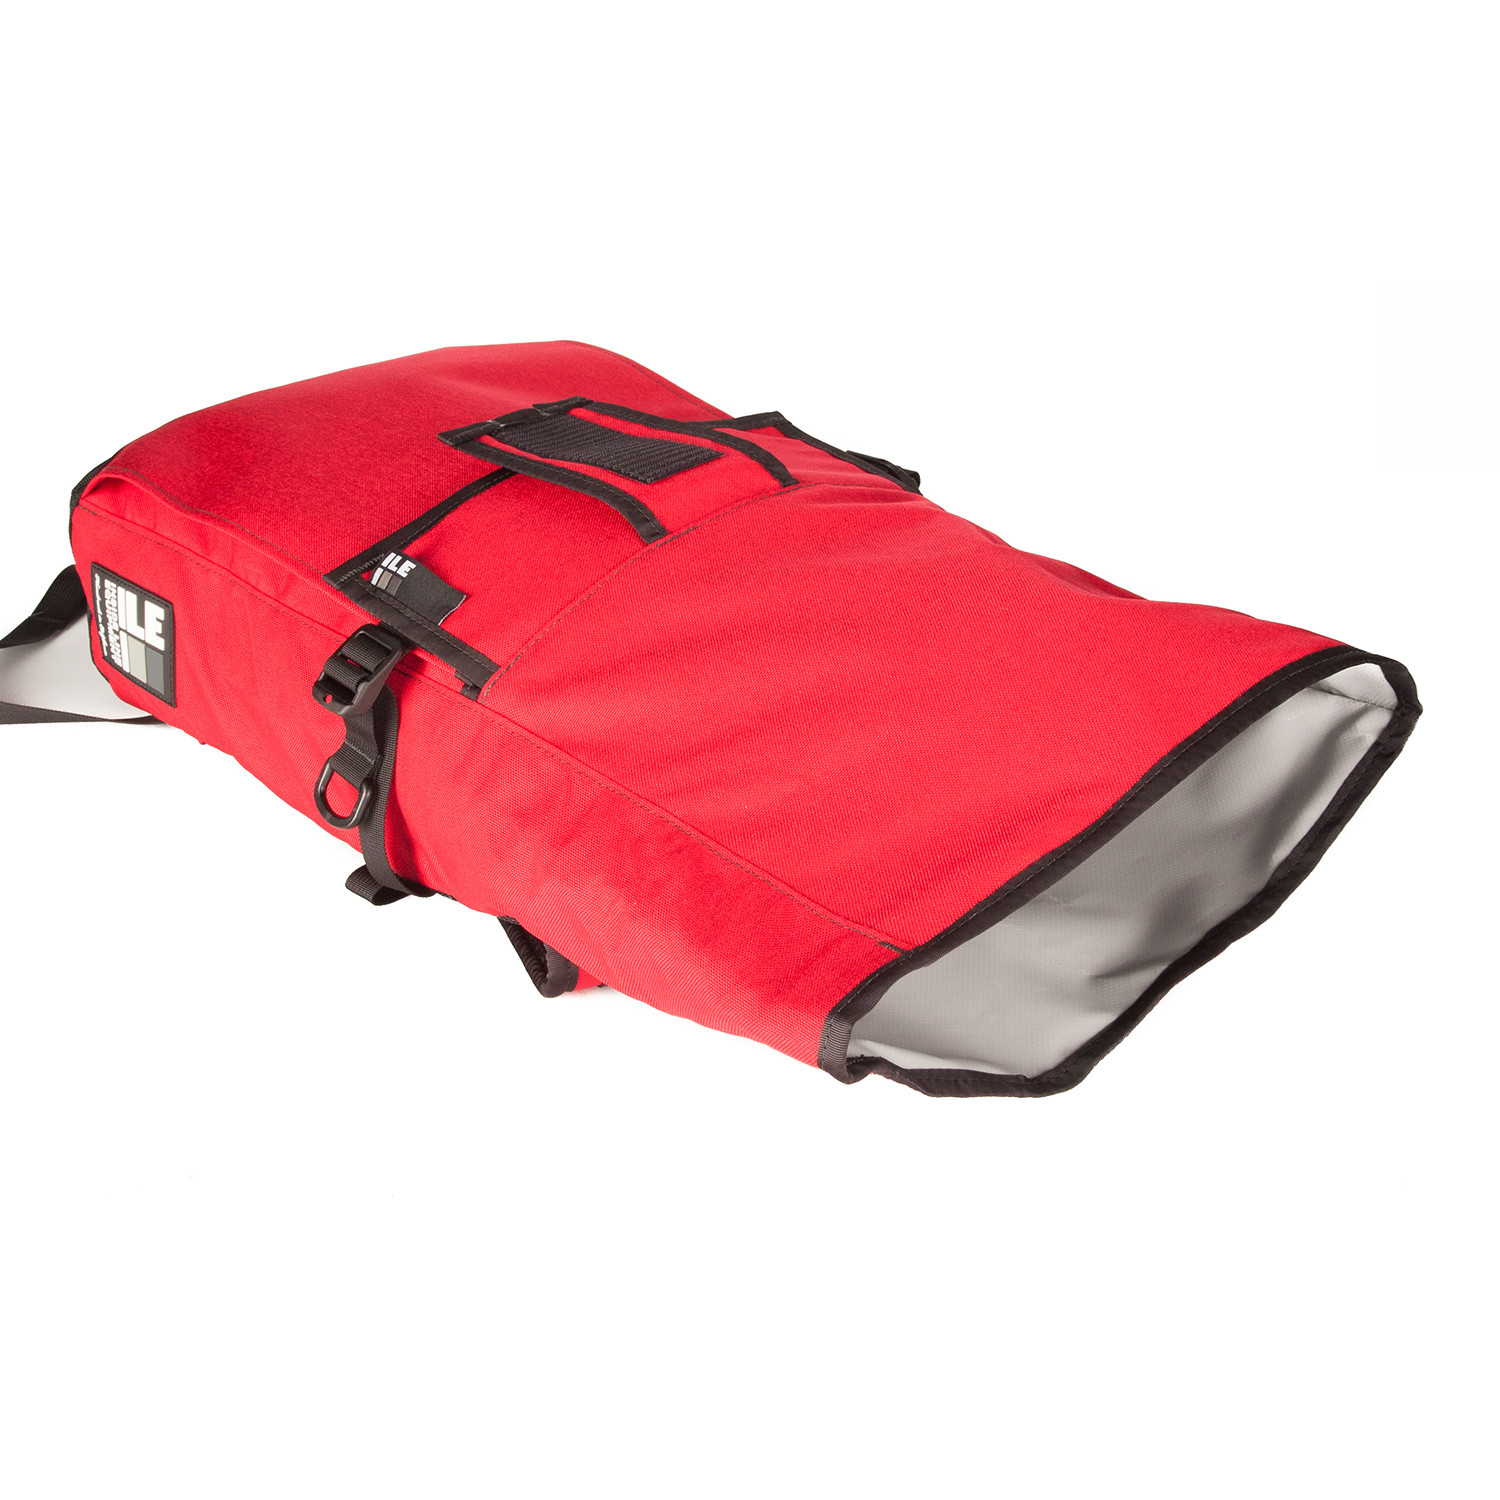 Transit Bag // Red - Inside Line Equipment - Touch of Modern